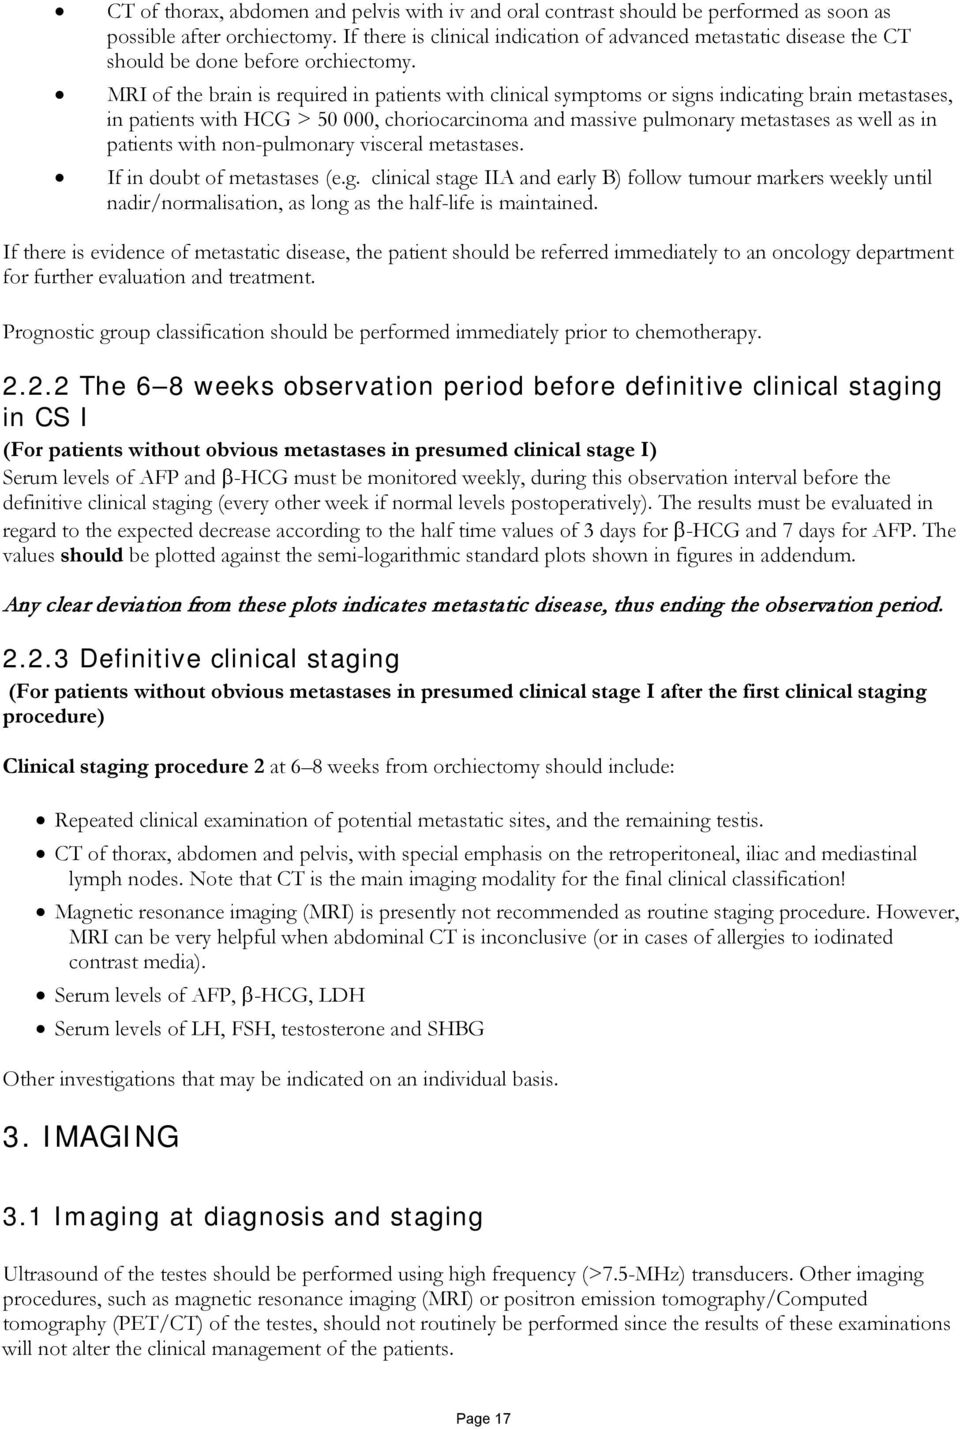 MRI of the brain is required in patients with clinical symptoms or signs indicating brain metastases, in patients with HCG > 50 000, choriocarcinoma and massive pulmonary metastases as well as in